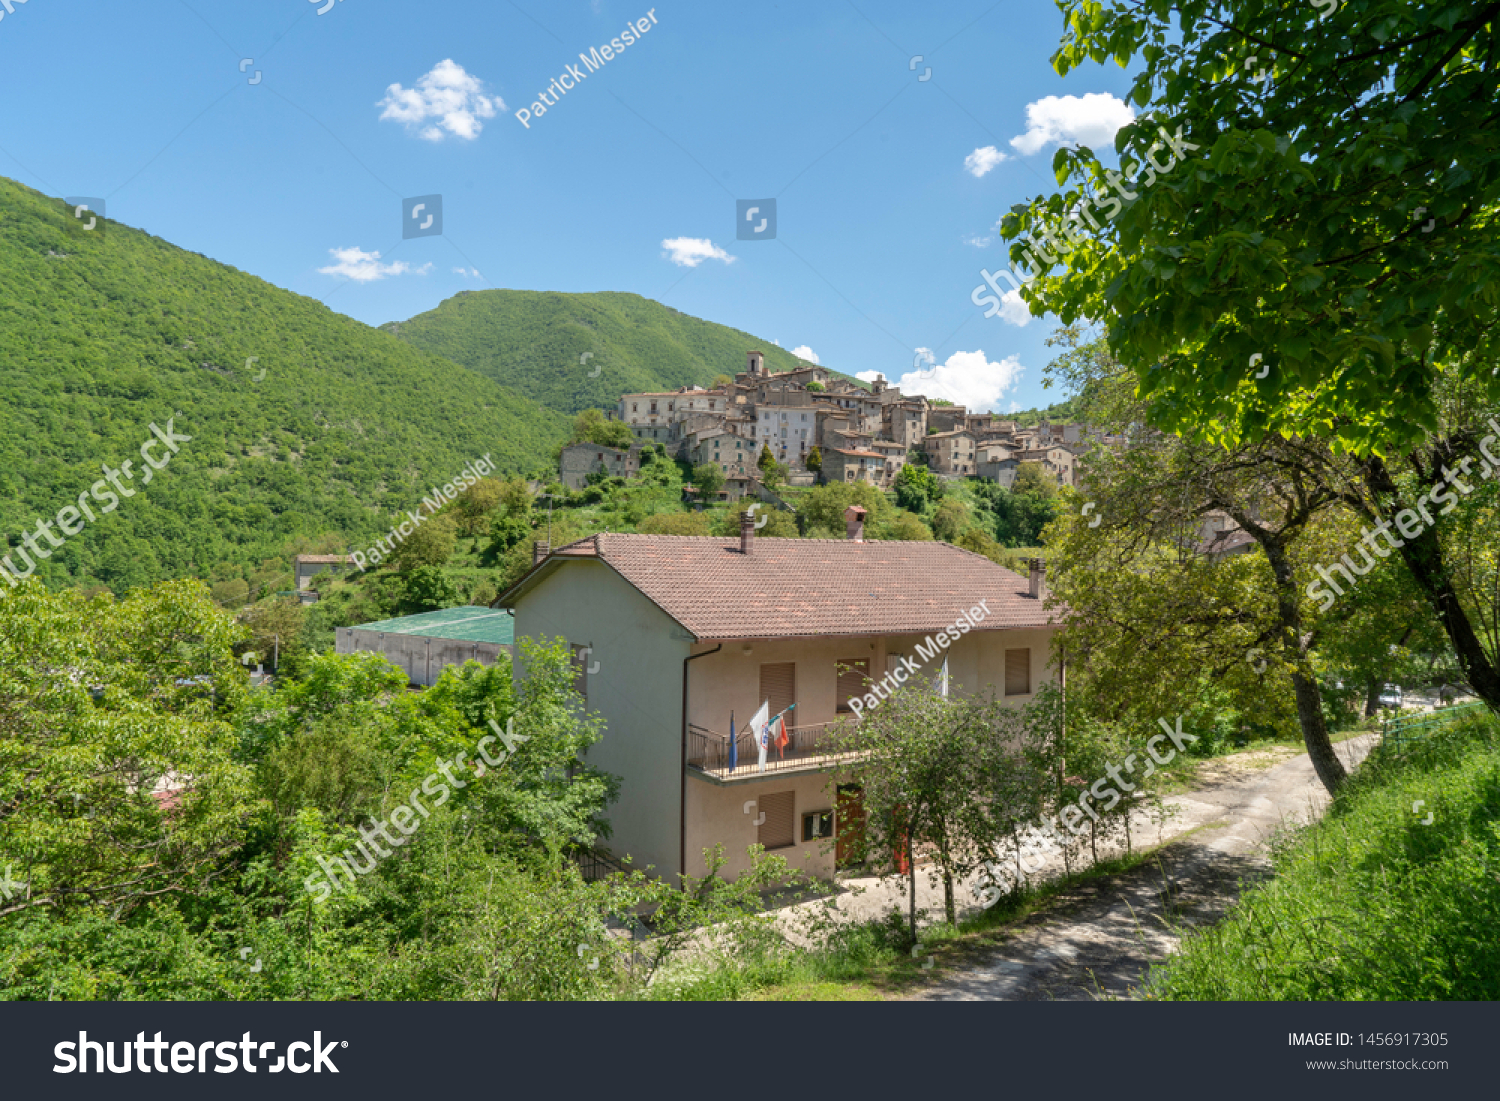 Scanno is a town and district in the province of L'Aquila, in the Abruzzo region of central Italy.  #1456917305